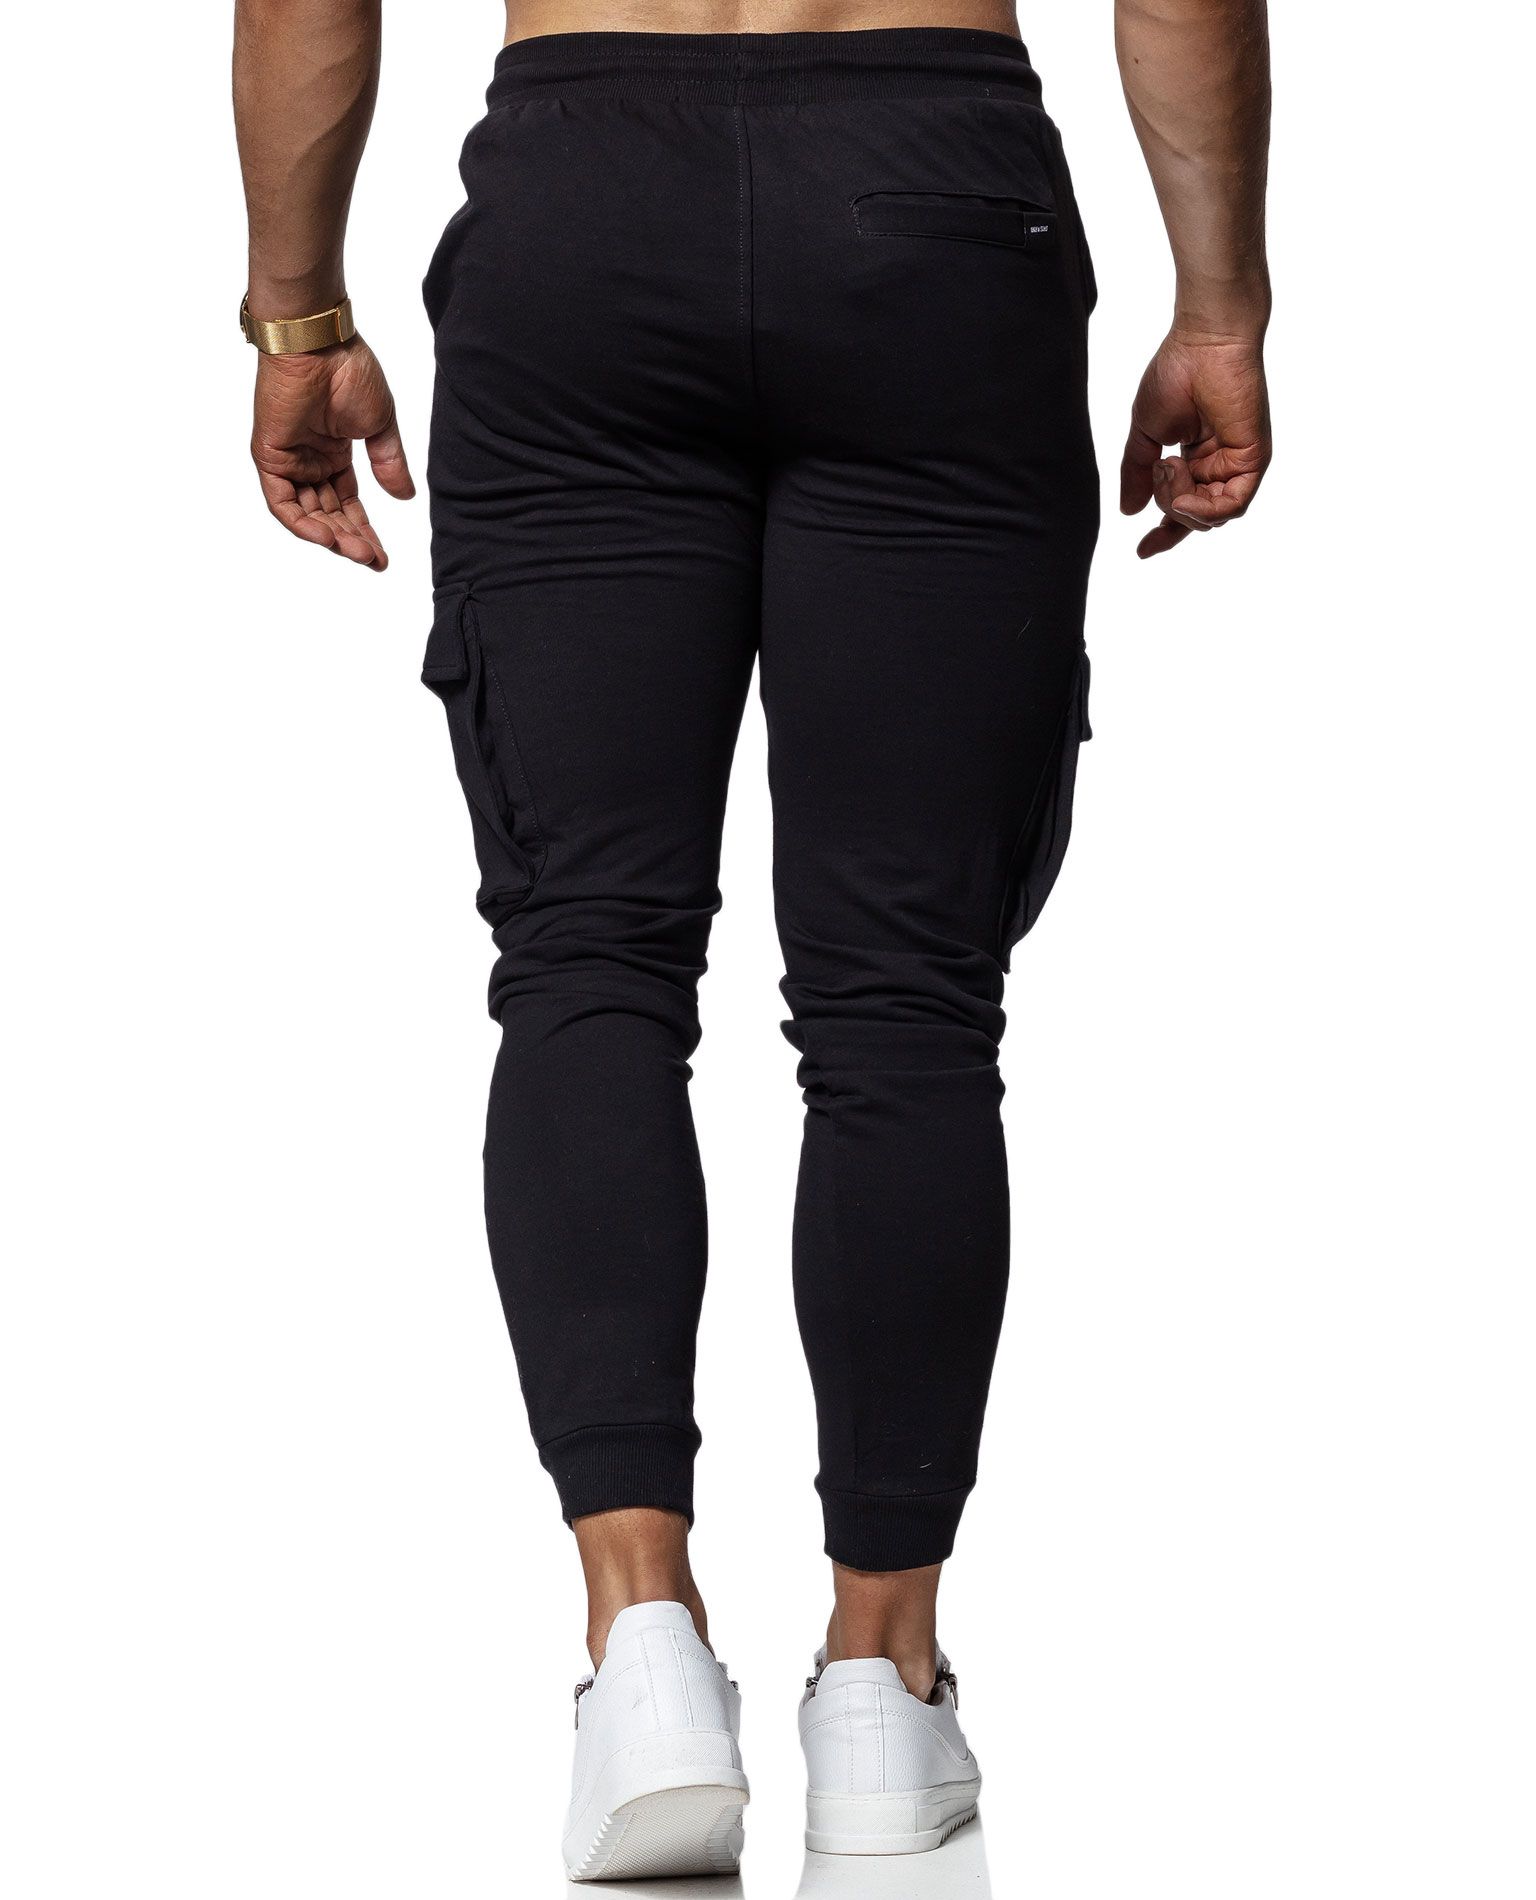 Kendrick Black College Pants Only & Sons - 9485 - Trousers - Jerone.com